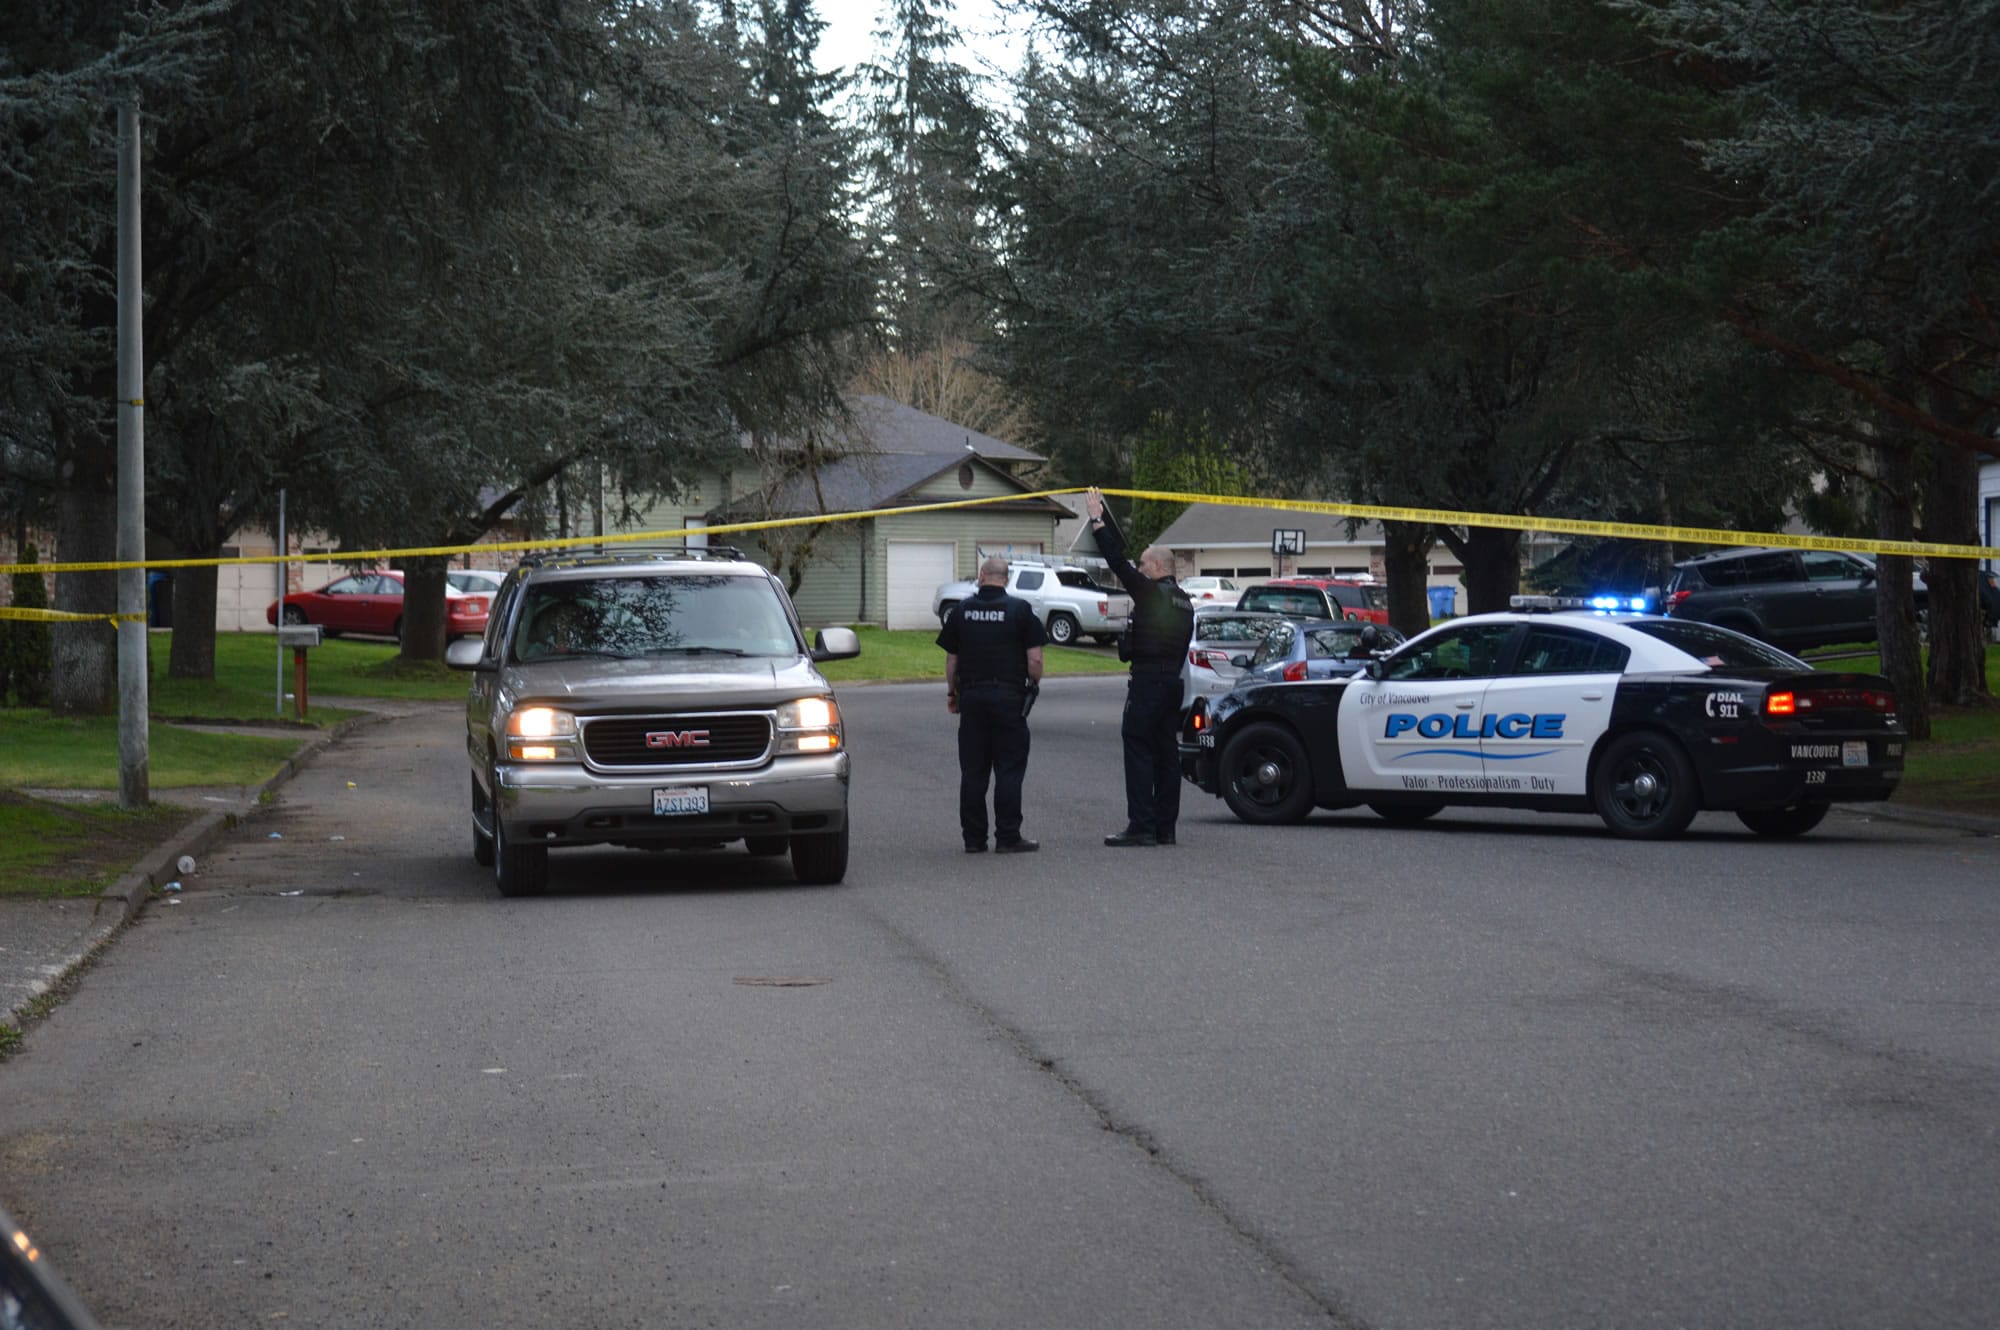 Officers direct a neighboring resident past a roadblock set up for a shooting investigation down the road Sunday evening on Northeast 140th Avenue. The Vancouver Police Department said officers responded to a report of a shooting in the area and found two dead men at a residence in the 1500 block.